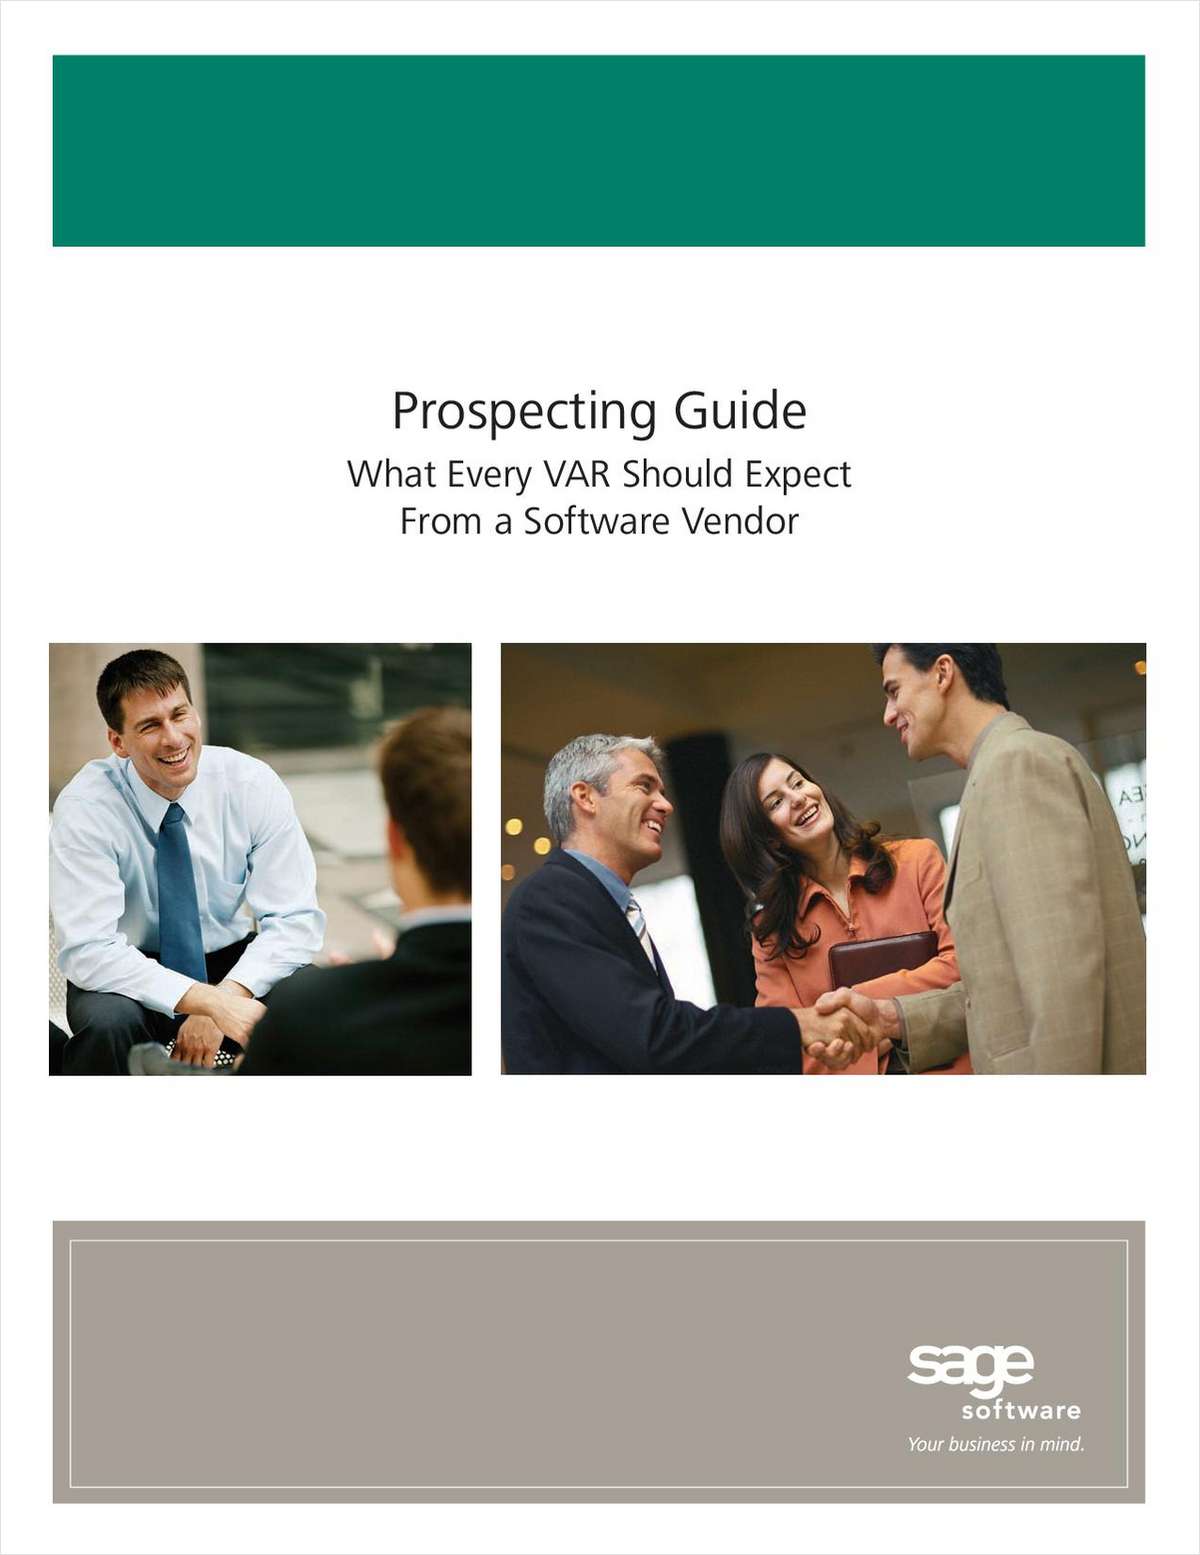 Prospecting Guide: What Every VAR Should Expect From a Software Vendor